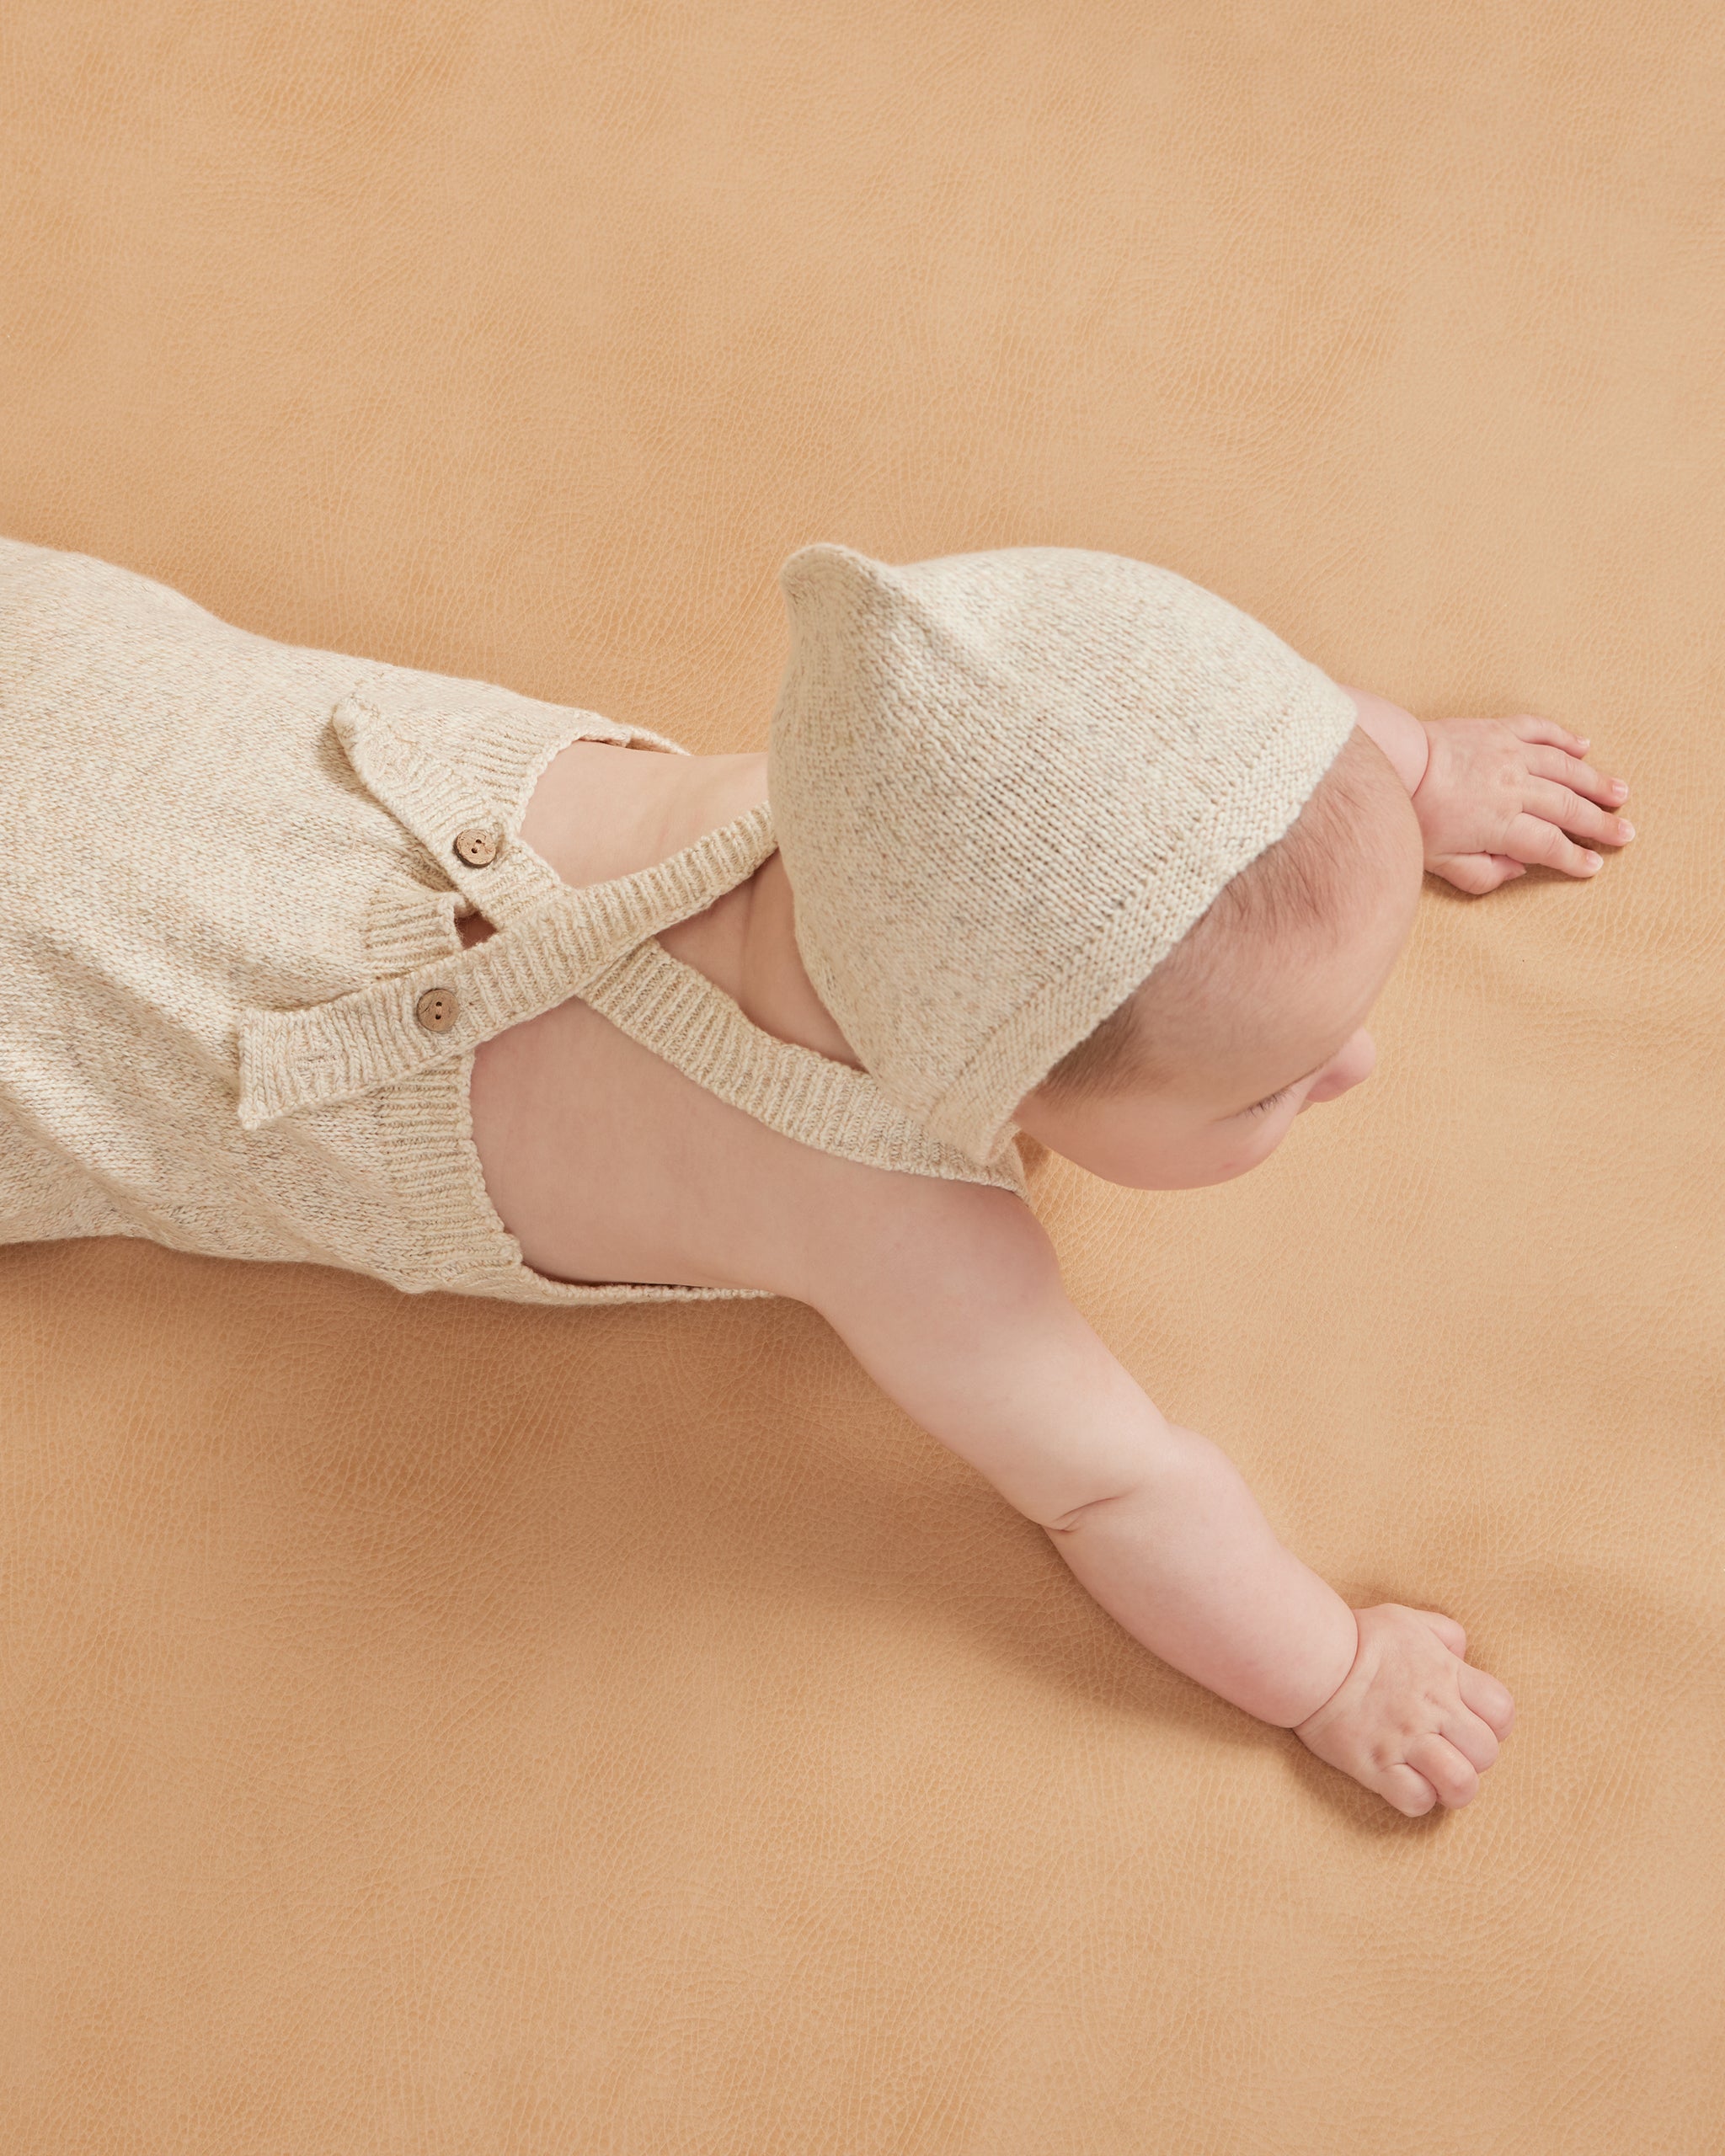 Knit Bonnet || Ivory - Rylee + Cru | Kids Clothes | Trendy Baby Clothes | Modern Infant Outfits |